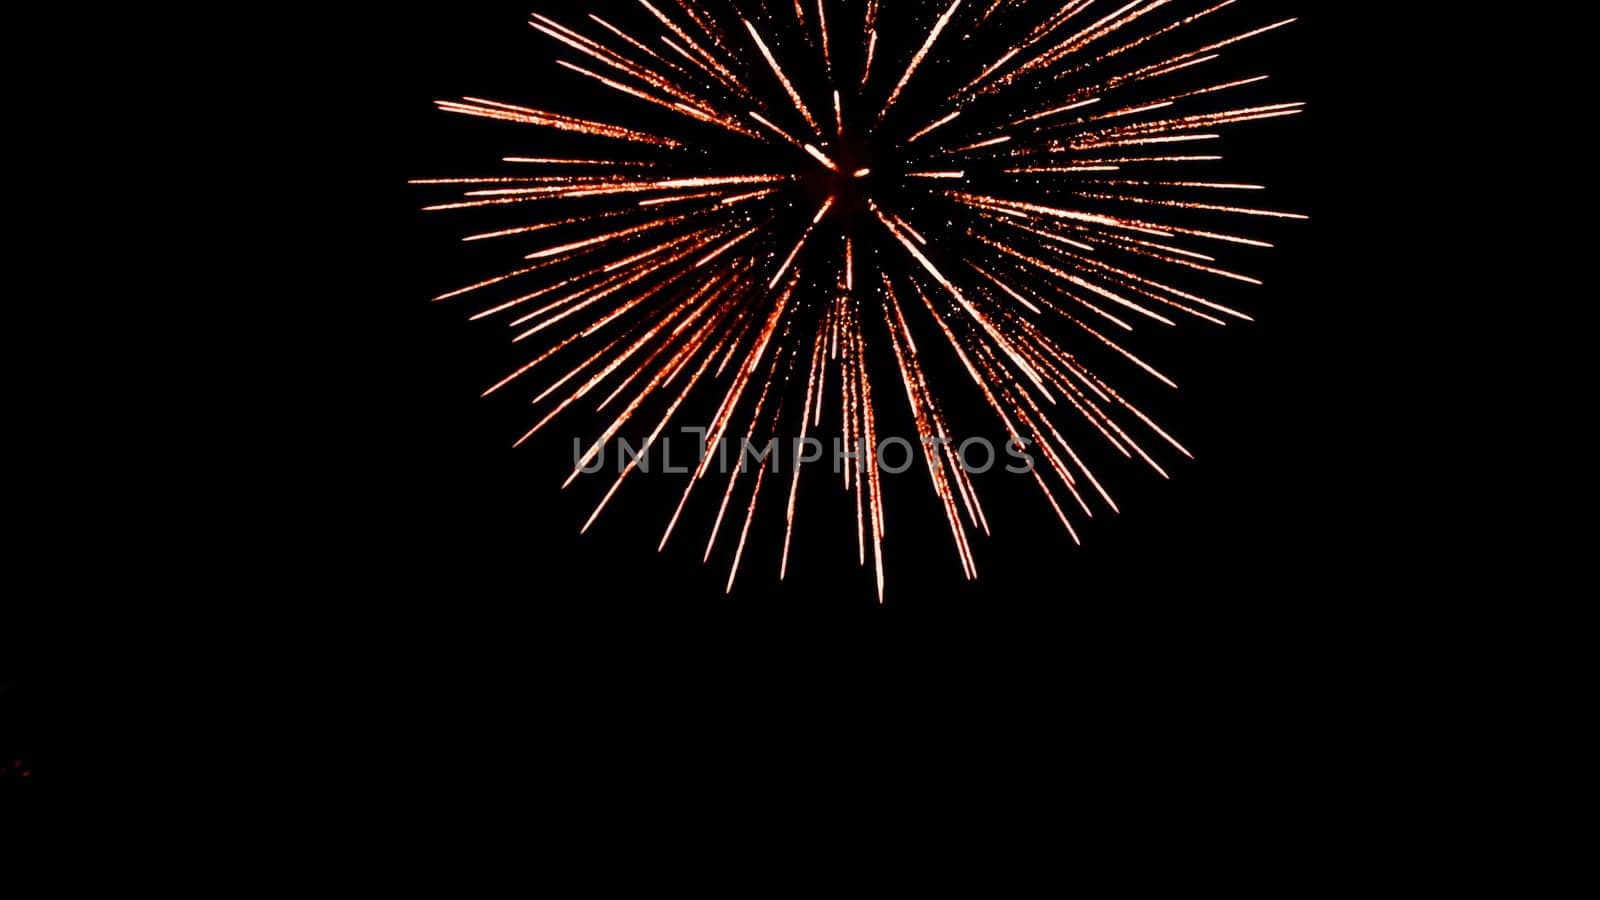 Brilliant firework explodes against the dark backdrop, creating a stunning spectacle